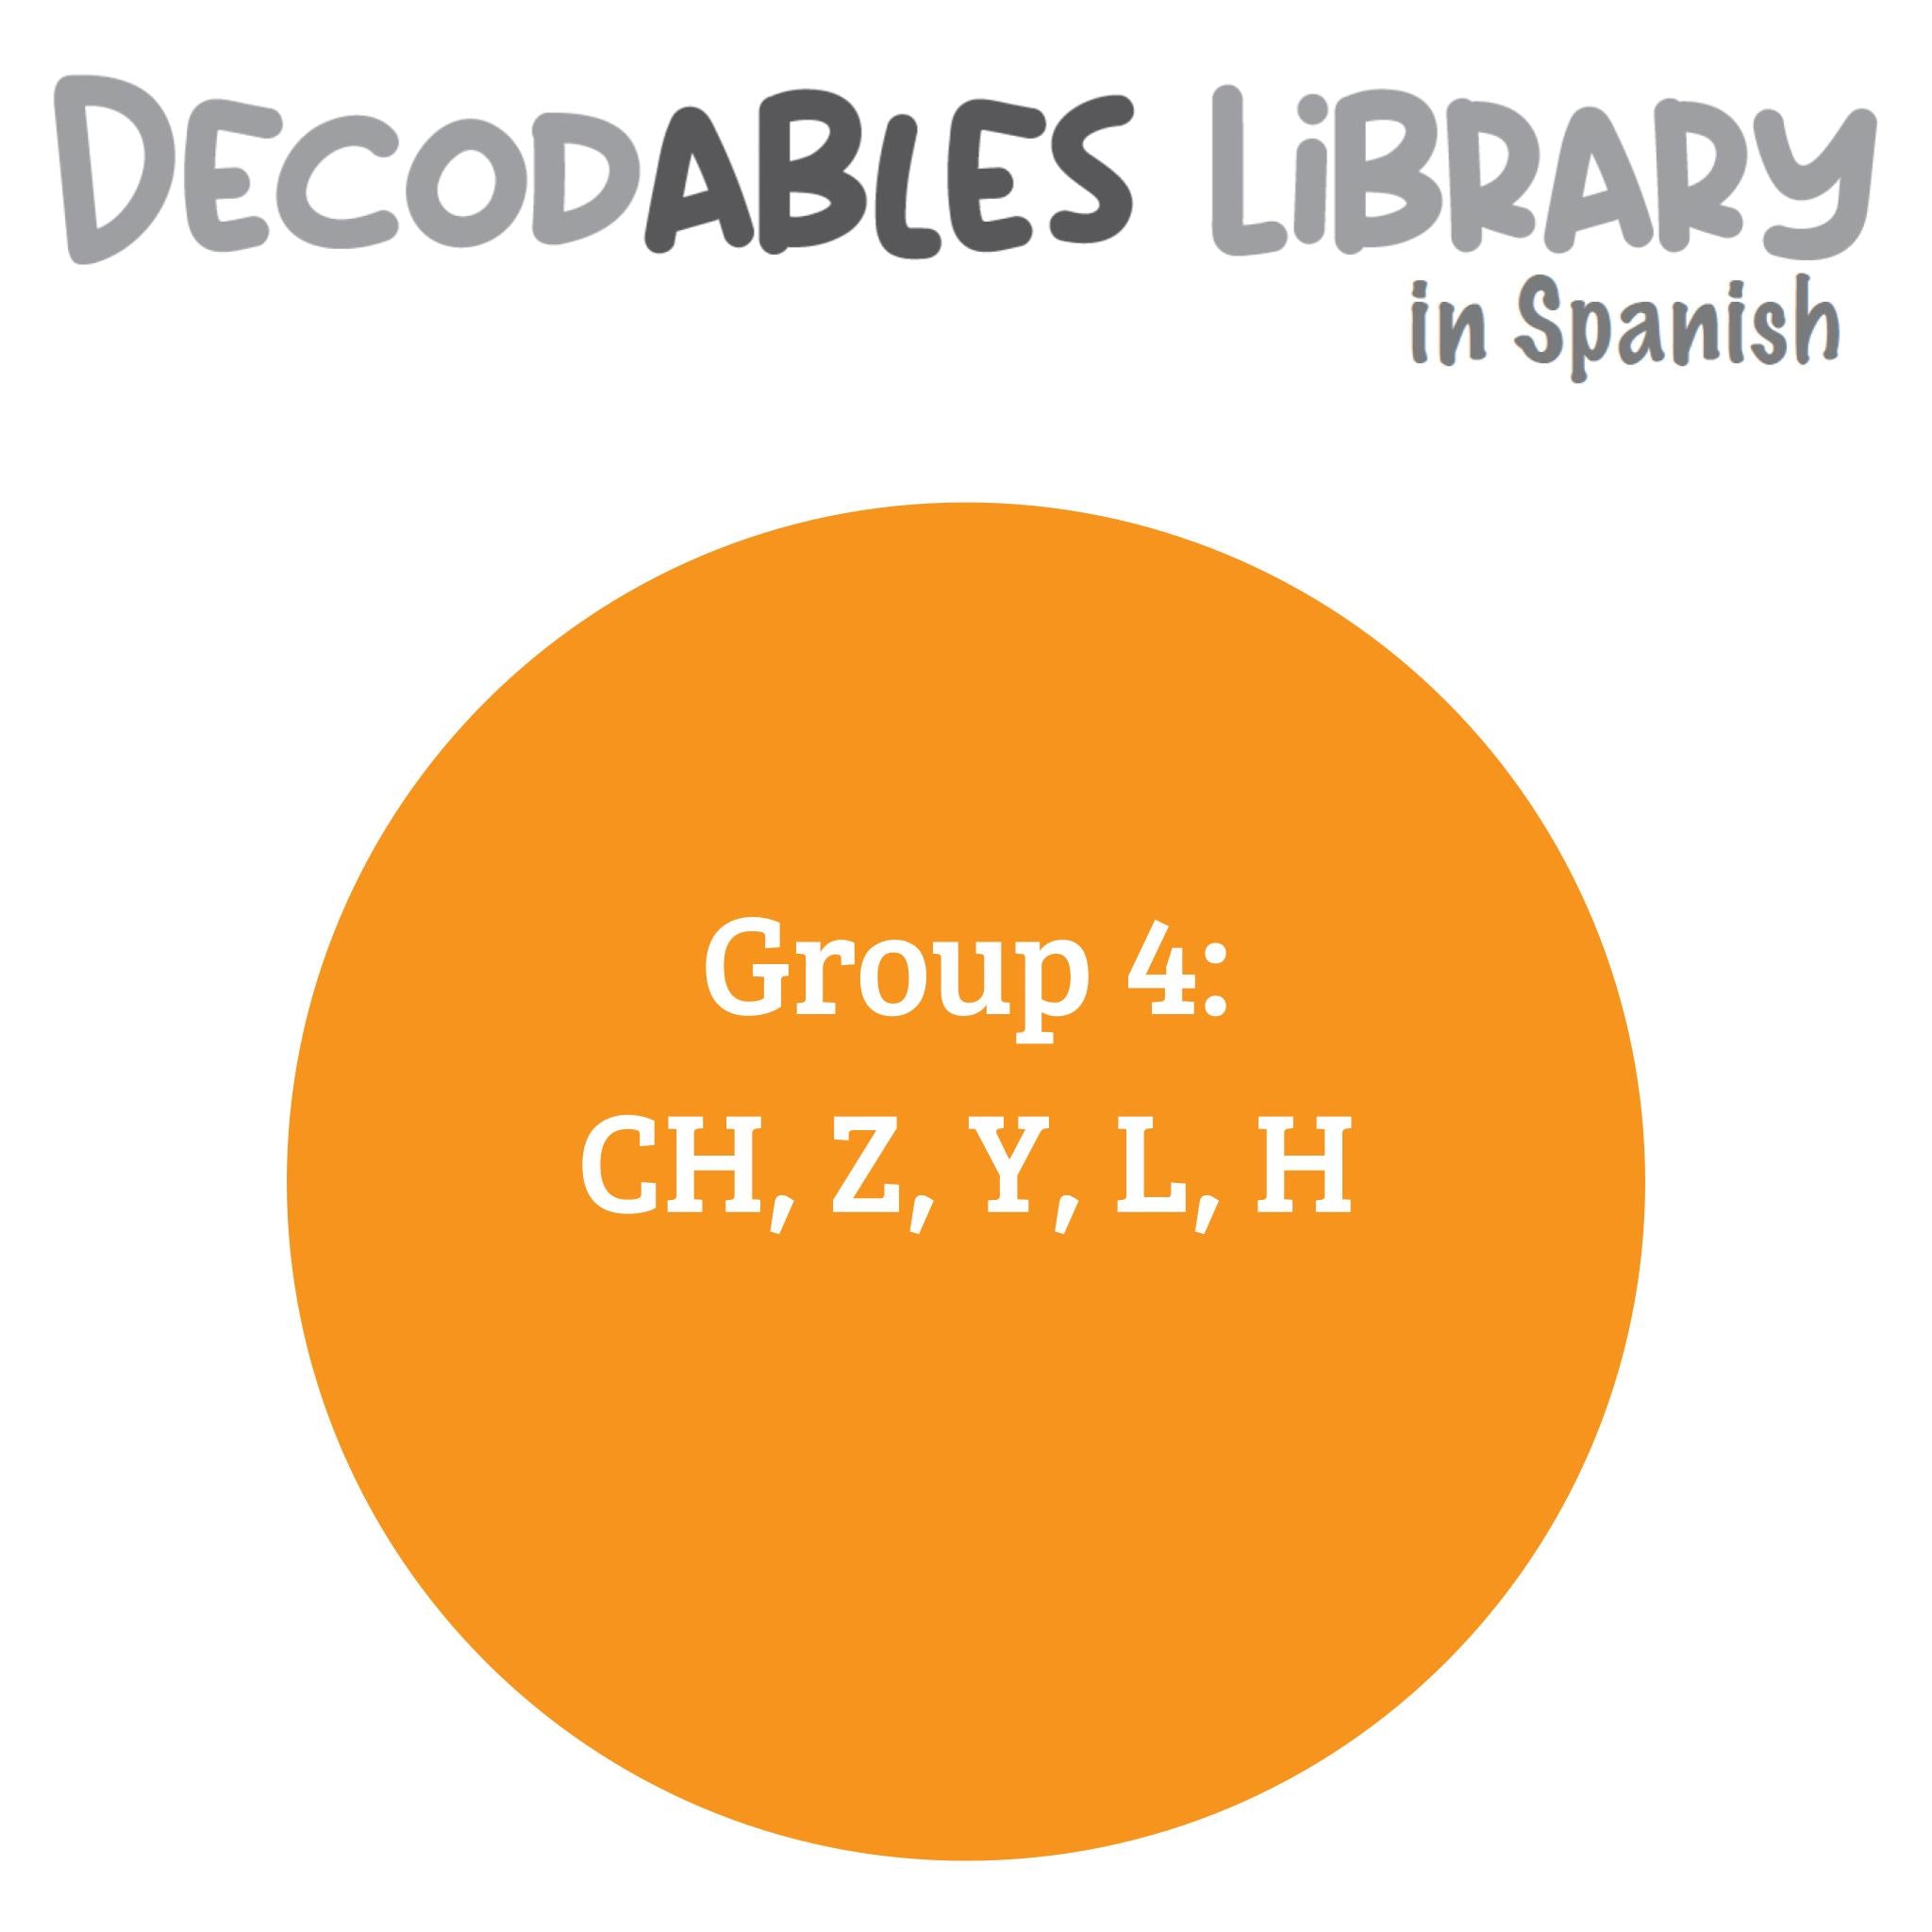 Spanish Decodables Library - Group 4: CH, Z, Y, L, H (set of 23 titles)